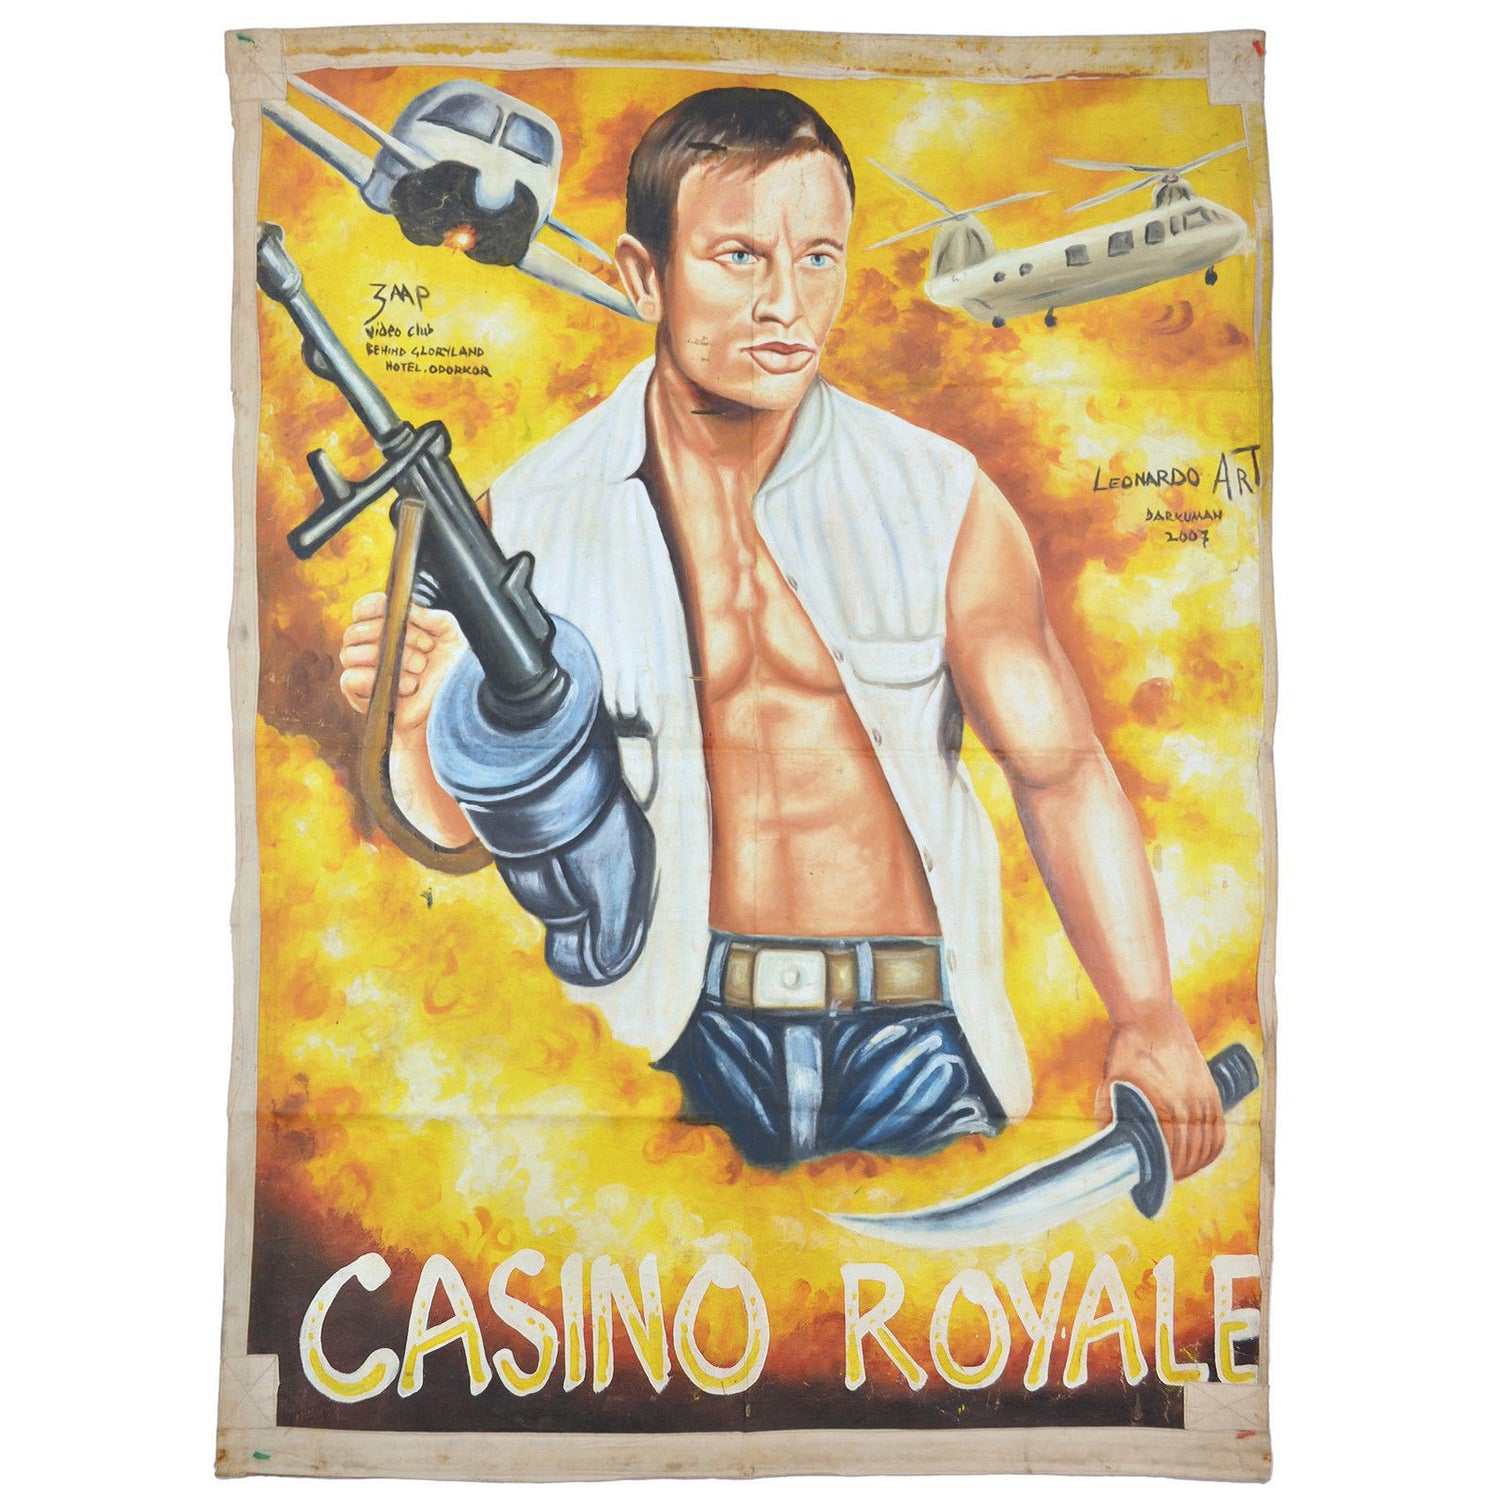 CASINO ROYALE MOVIE POSTER JAMES BOND OO7 HAND PAINTED IN GHANA